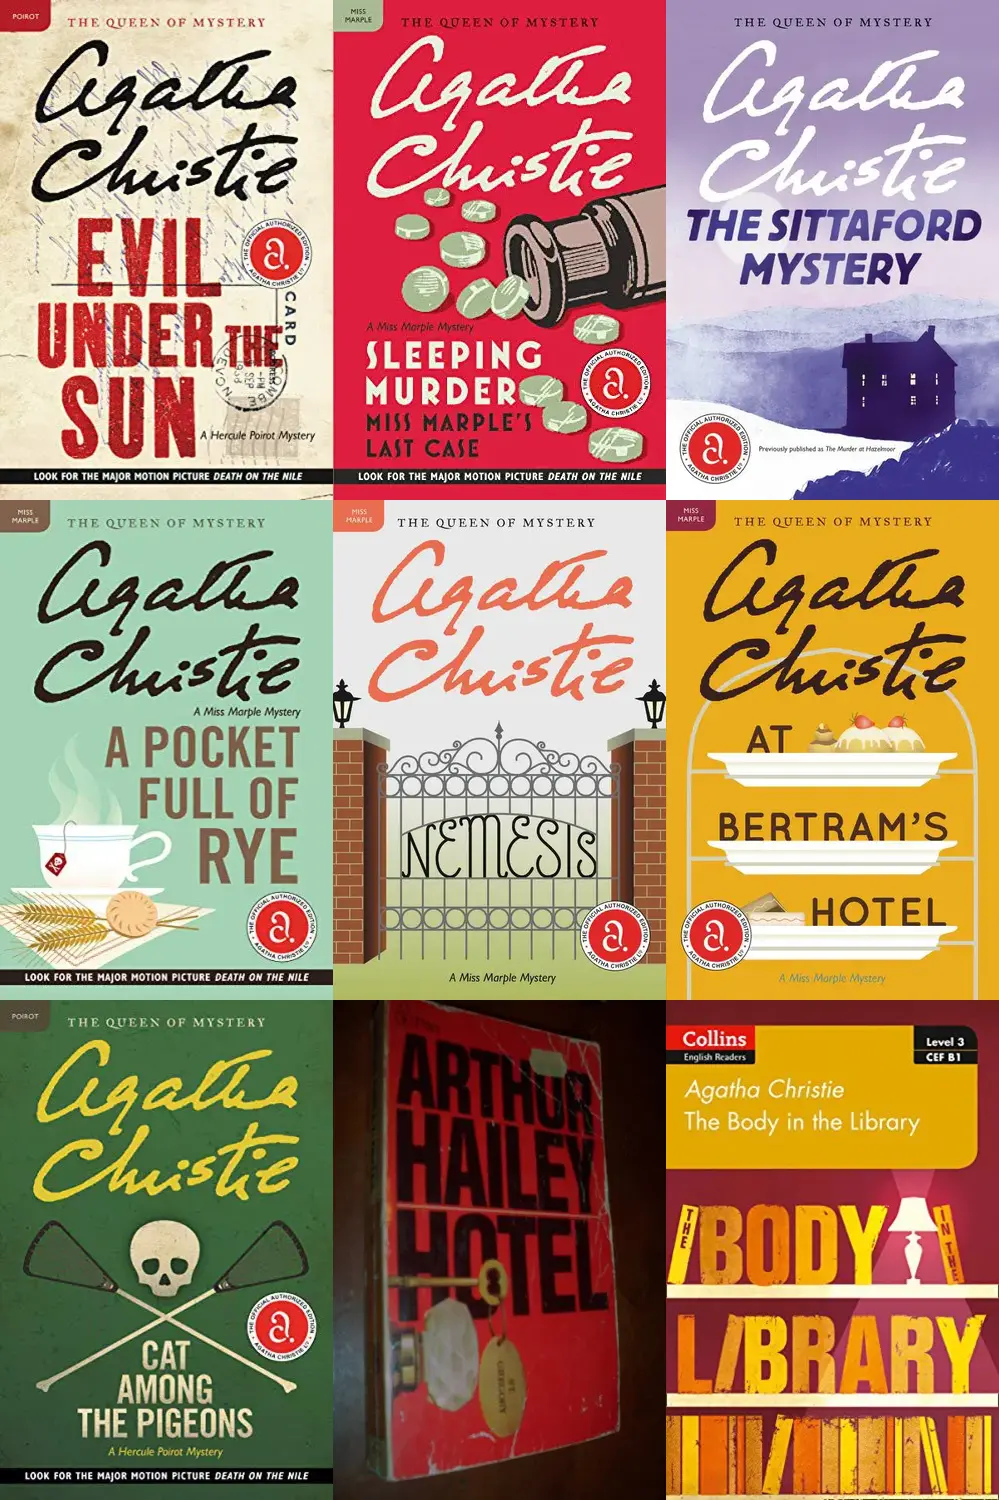 If I liked A Caribbean Mystery (Miss Marple) by Agatha Christie, what  should I read next?